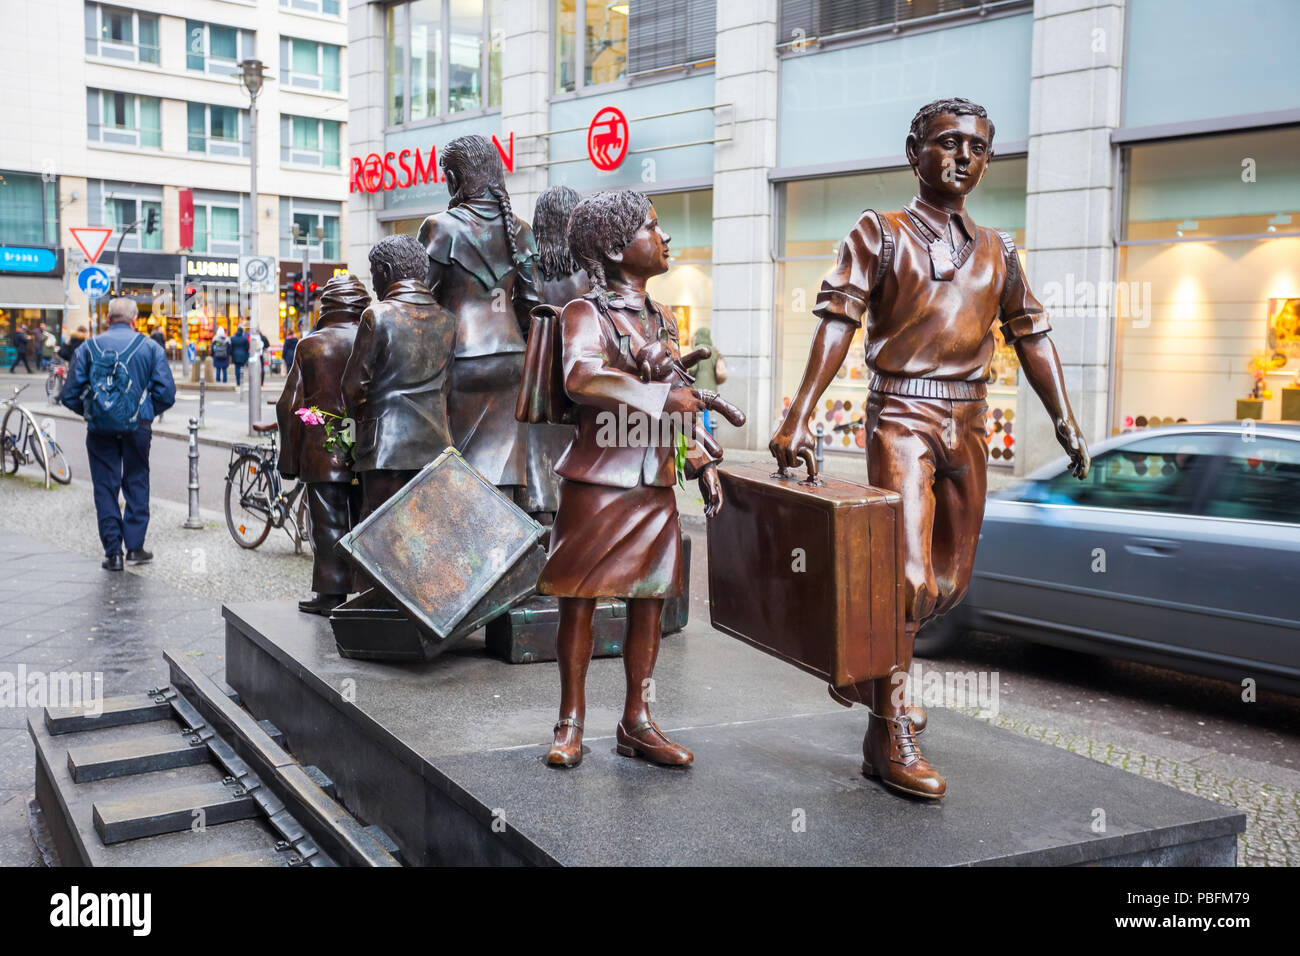 19.01.2018 Berlin, Germany - Kindertransport memorial statue commemorates a series of rescue efforts which brought thousands of refugee Jewish childre Stock Photo